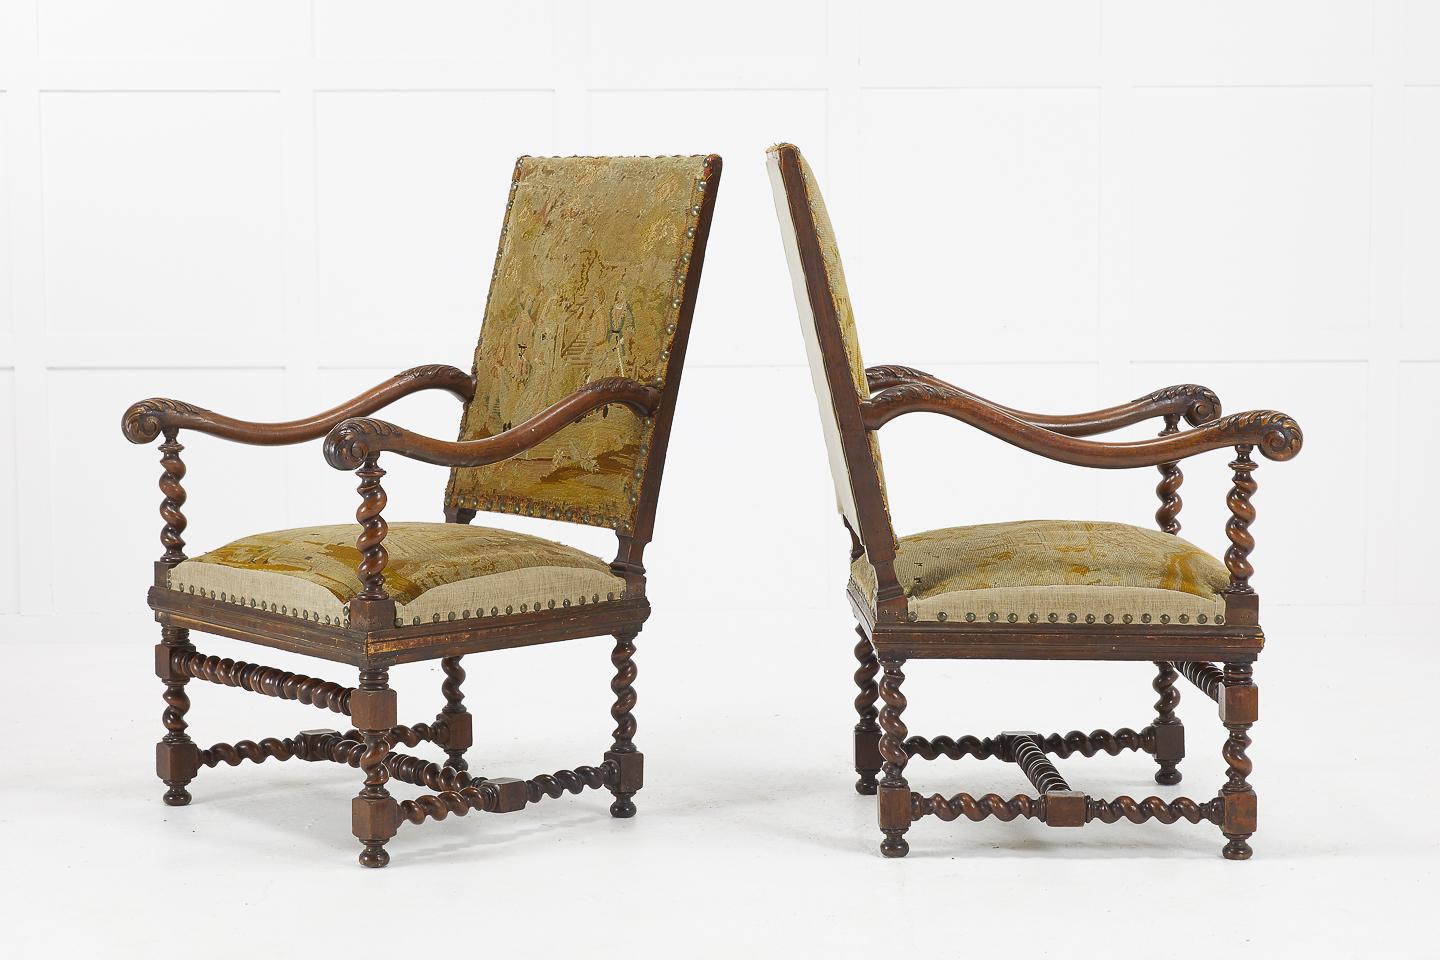 Pair of 19th century French walnut chairs with beautiful faded tapestry and carved barley twist arm supports, legs and stretchers.

Measures: Seat height 42.5cm
Seat depth 53cm.